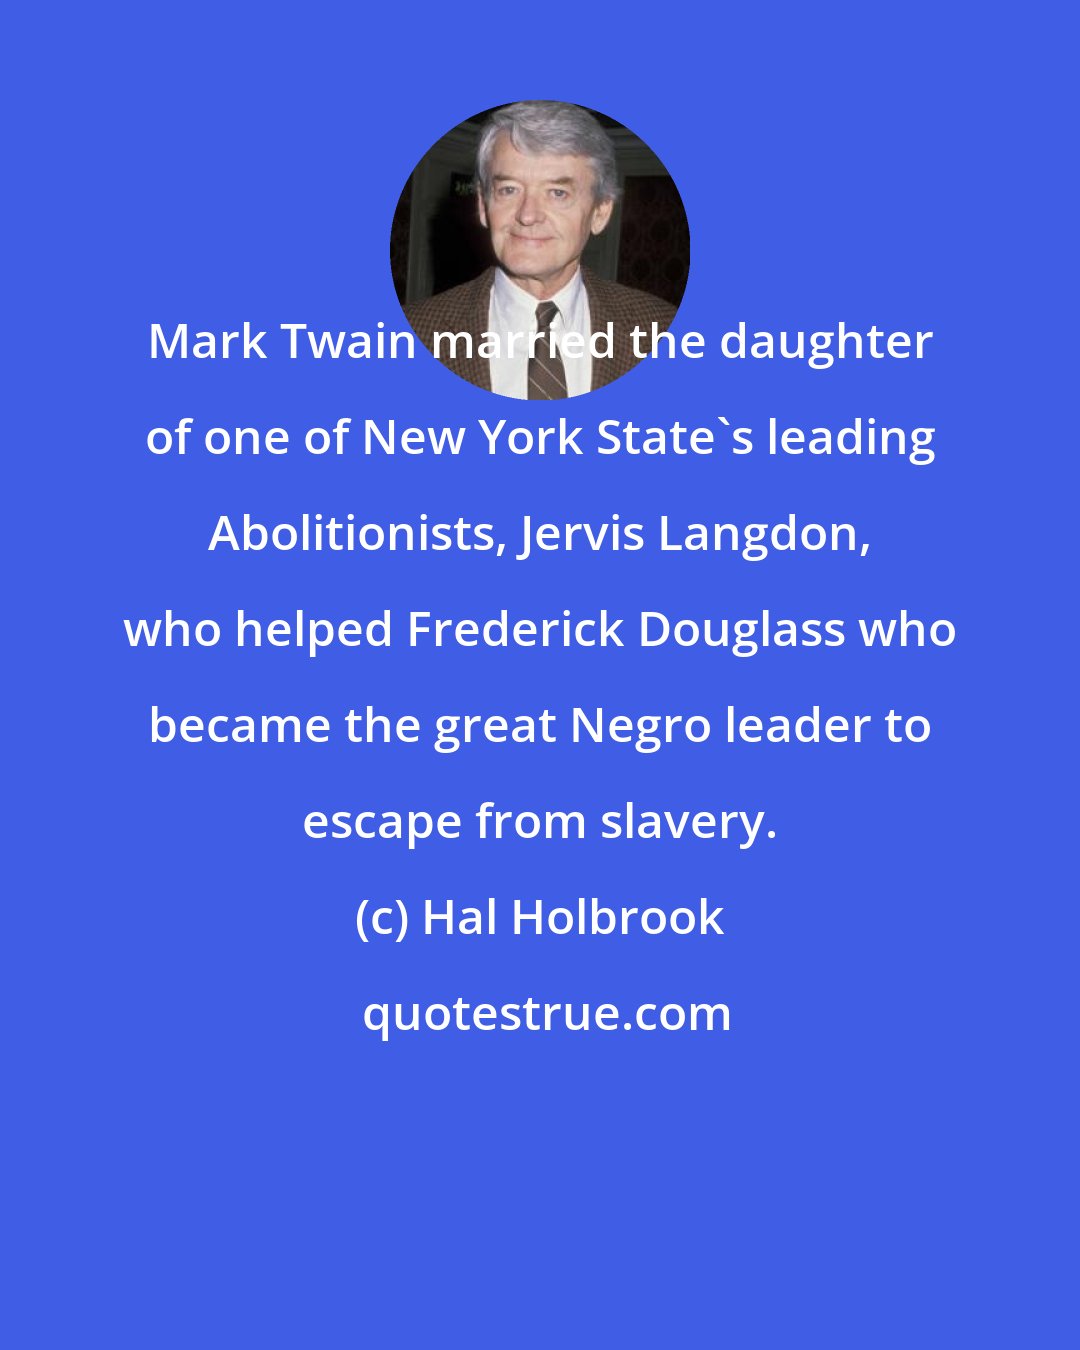 Hal Holbrook: Mark Twain married the daughter of one of New York State's leading Abolitionists, Jervis Langdon, who helped Frederick Douglass who became the great Negro leader to escape from slavery.